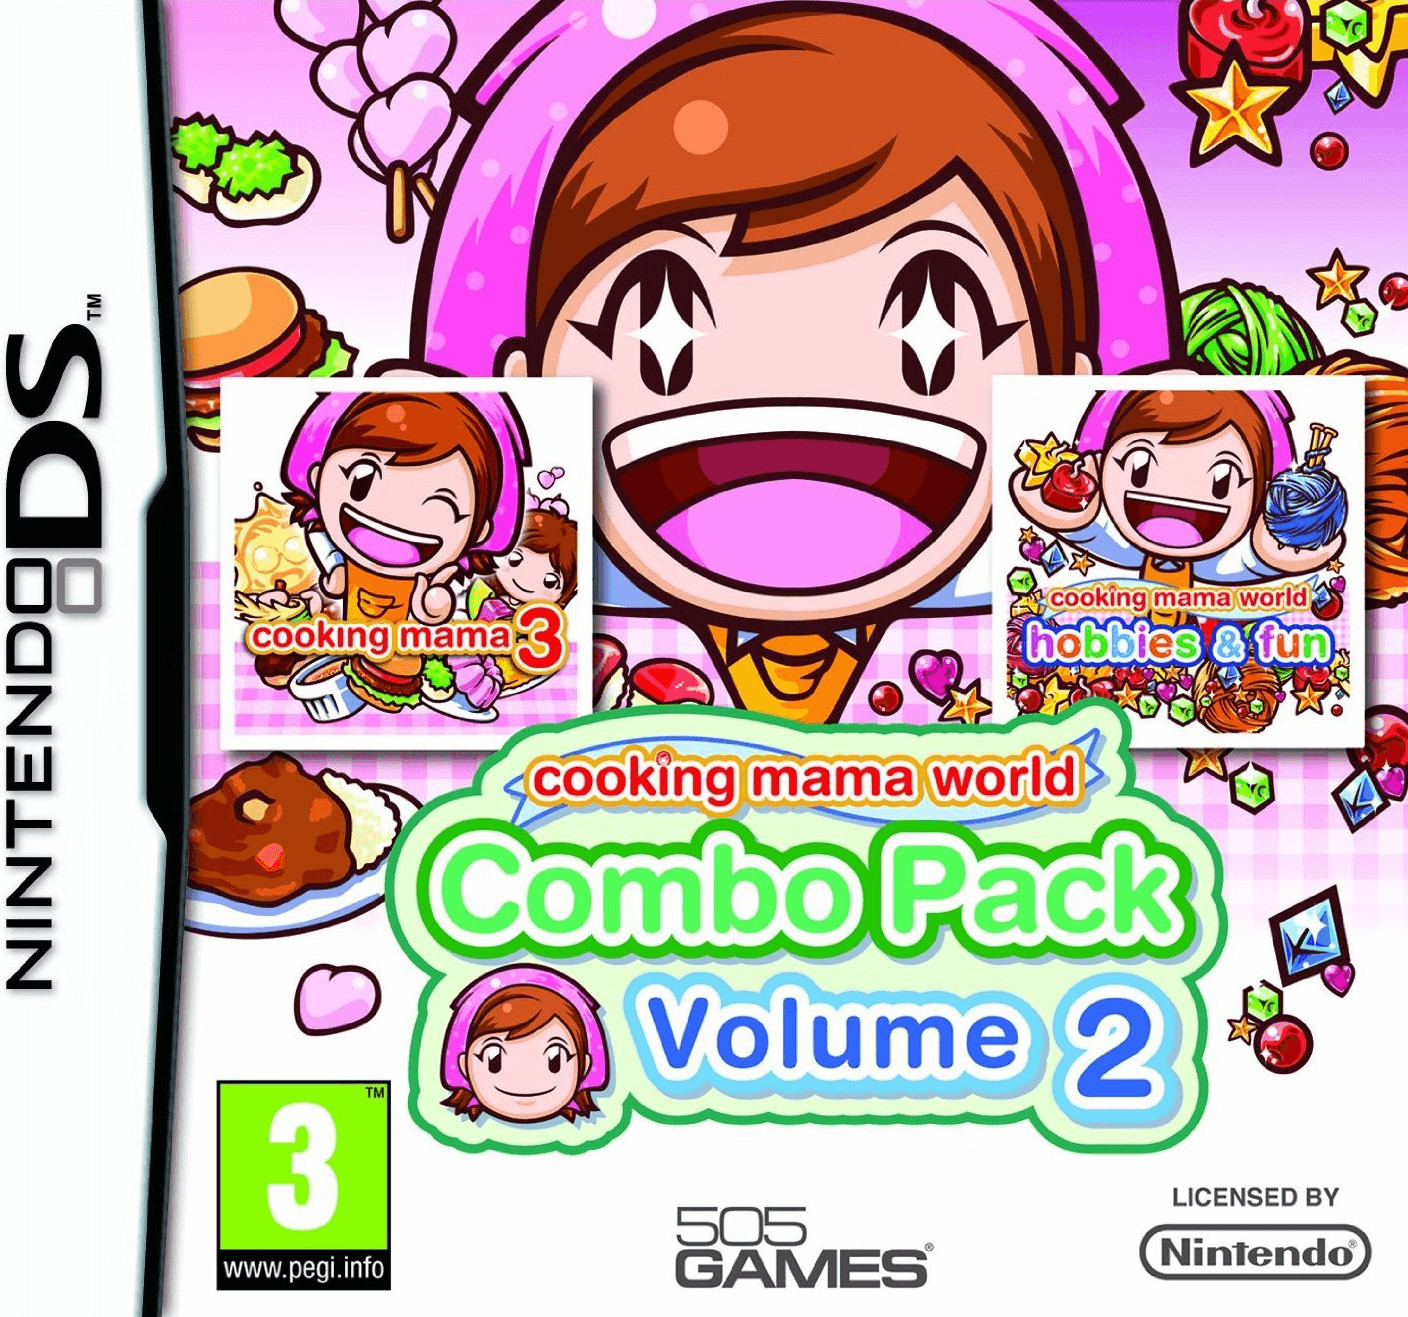 Cooking Mama World: Combo Pack Volume 2 (DS)